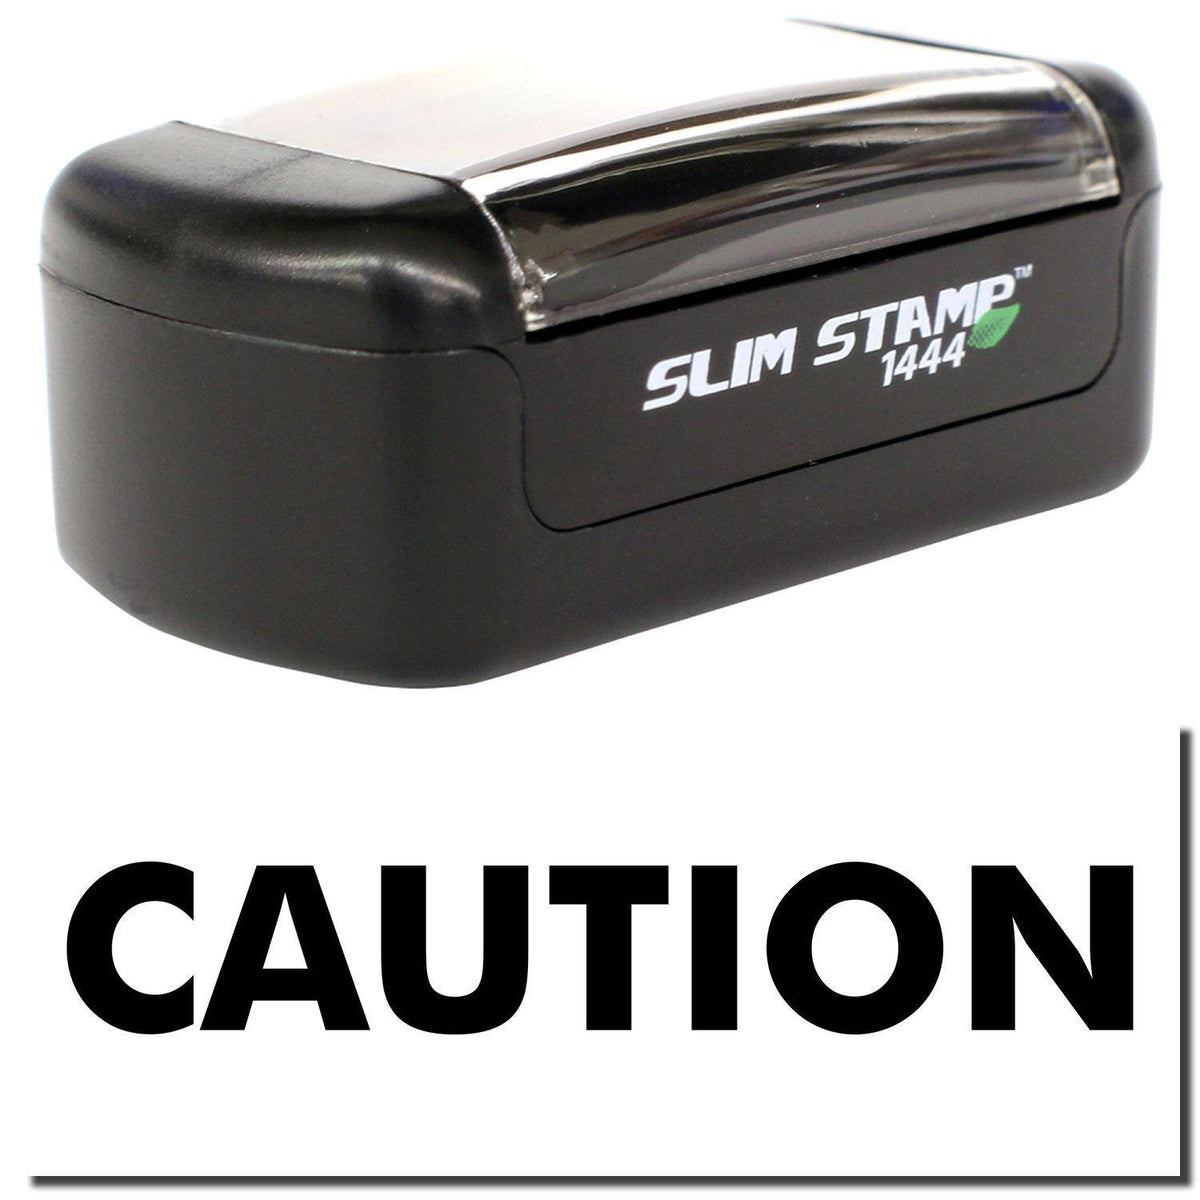 A stock office pre-inked stamp with a stamped image showing how the text &quot;CAUTION&quot; is displayed after stamping.